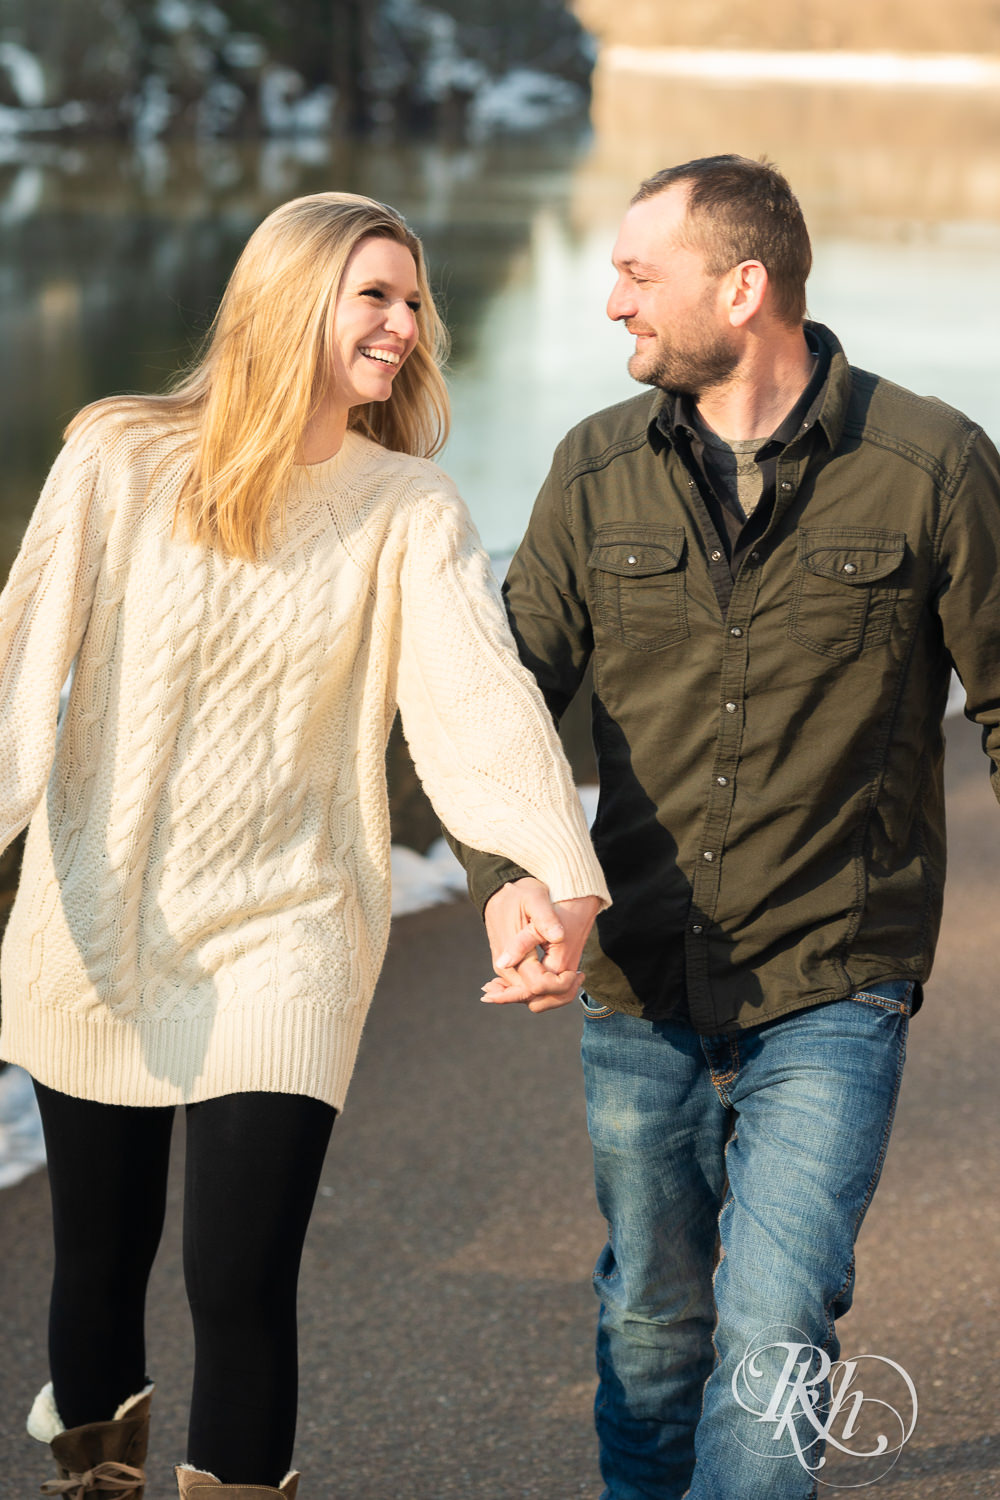 Man in jeans and green shirt and woman in a white sweater smile while walking during Taylor's Falls engagement photography session.